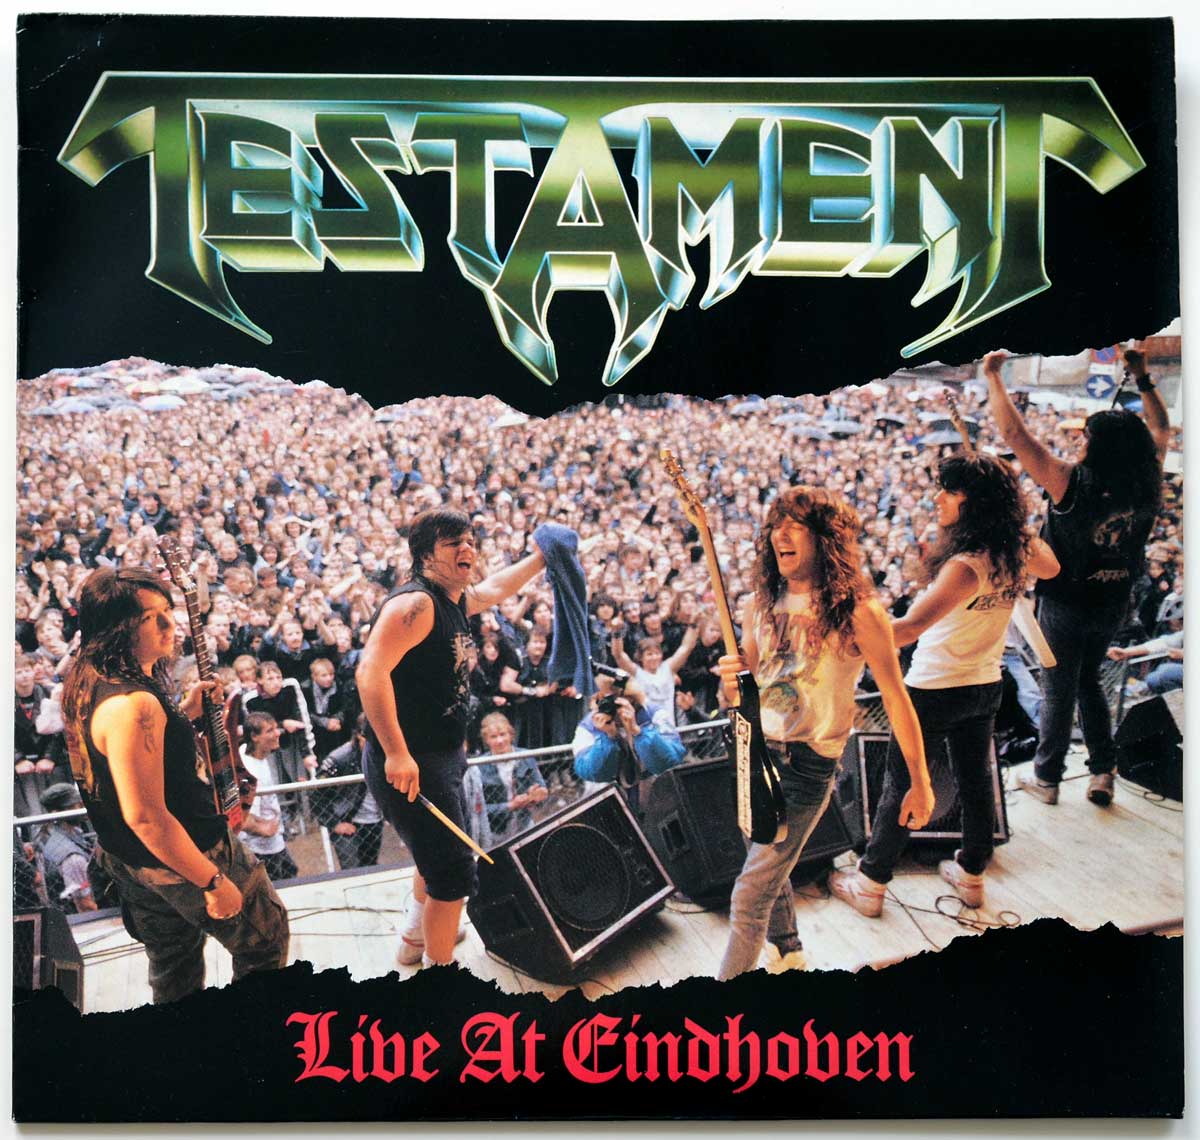 High Quality Photo of Album Front Cover  "TESTAMENT Live at Eindhoven"